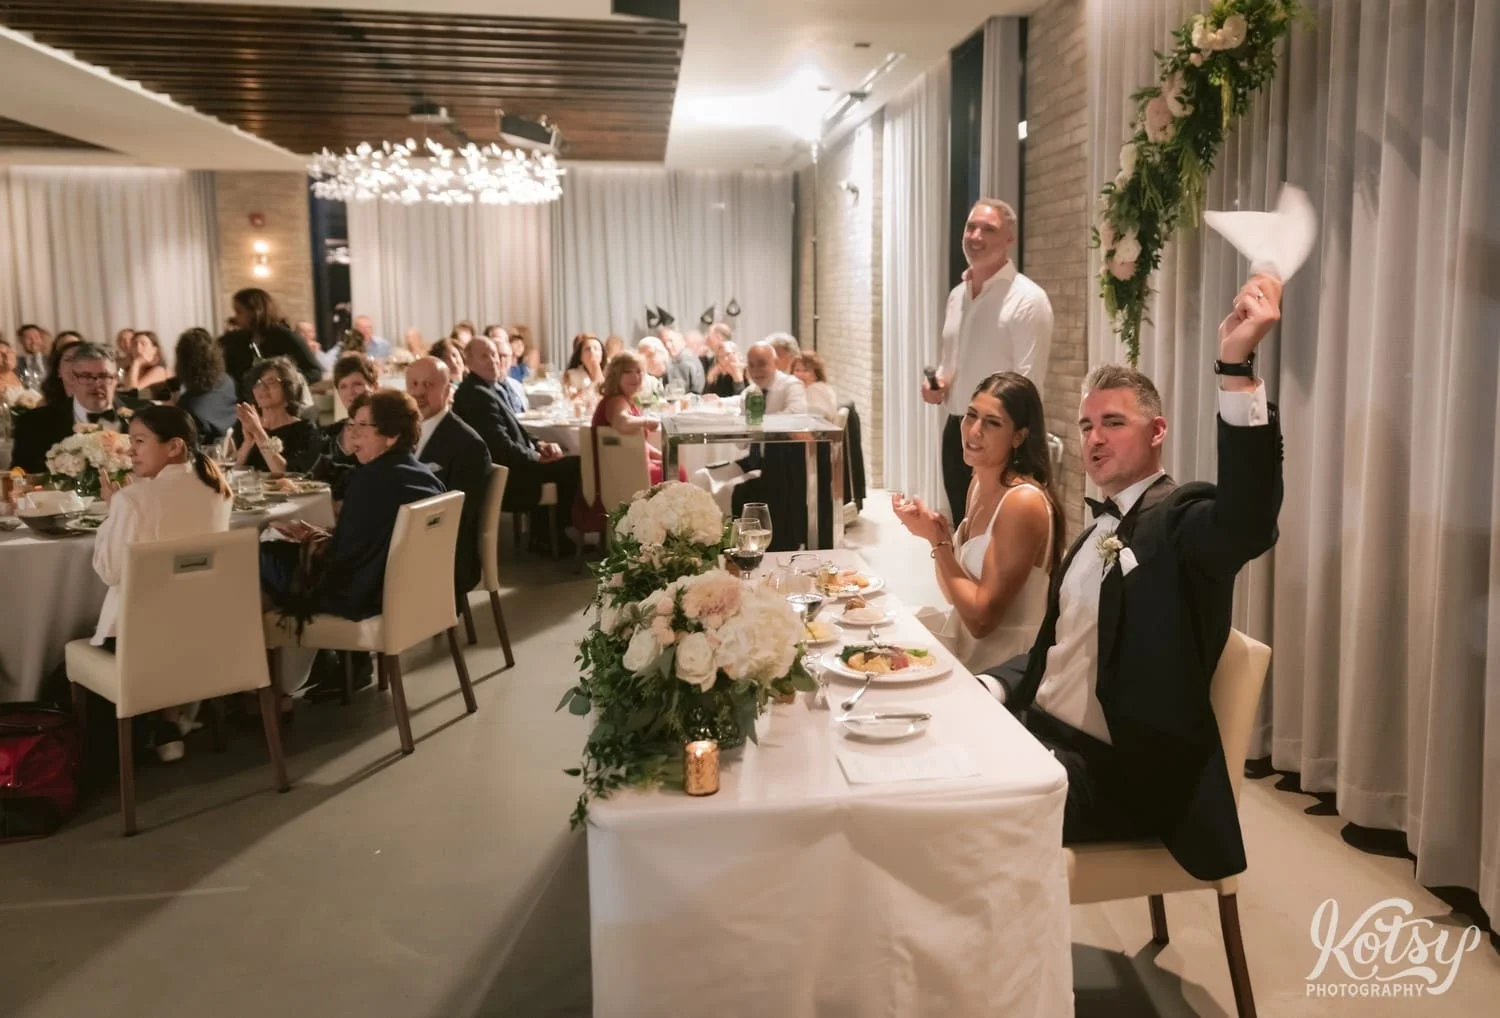 A groom waves a napkin in the area as a room full of people sing happy birthday to his mother at his Village Loft wedding reception in Toronto, Canada